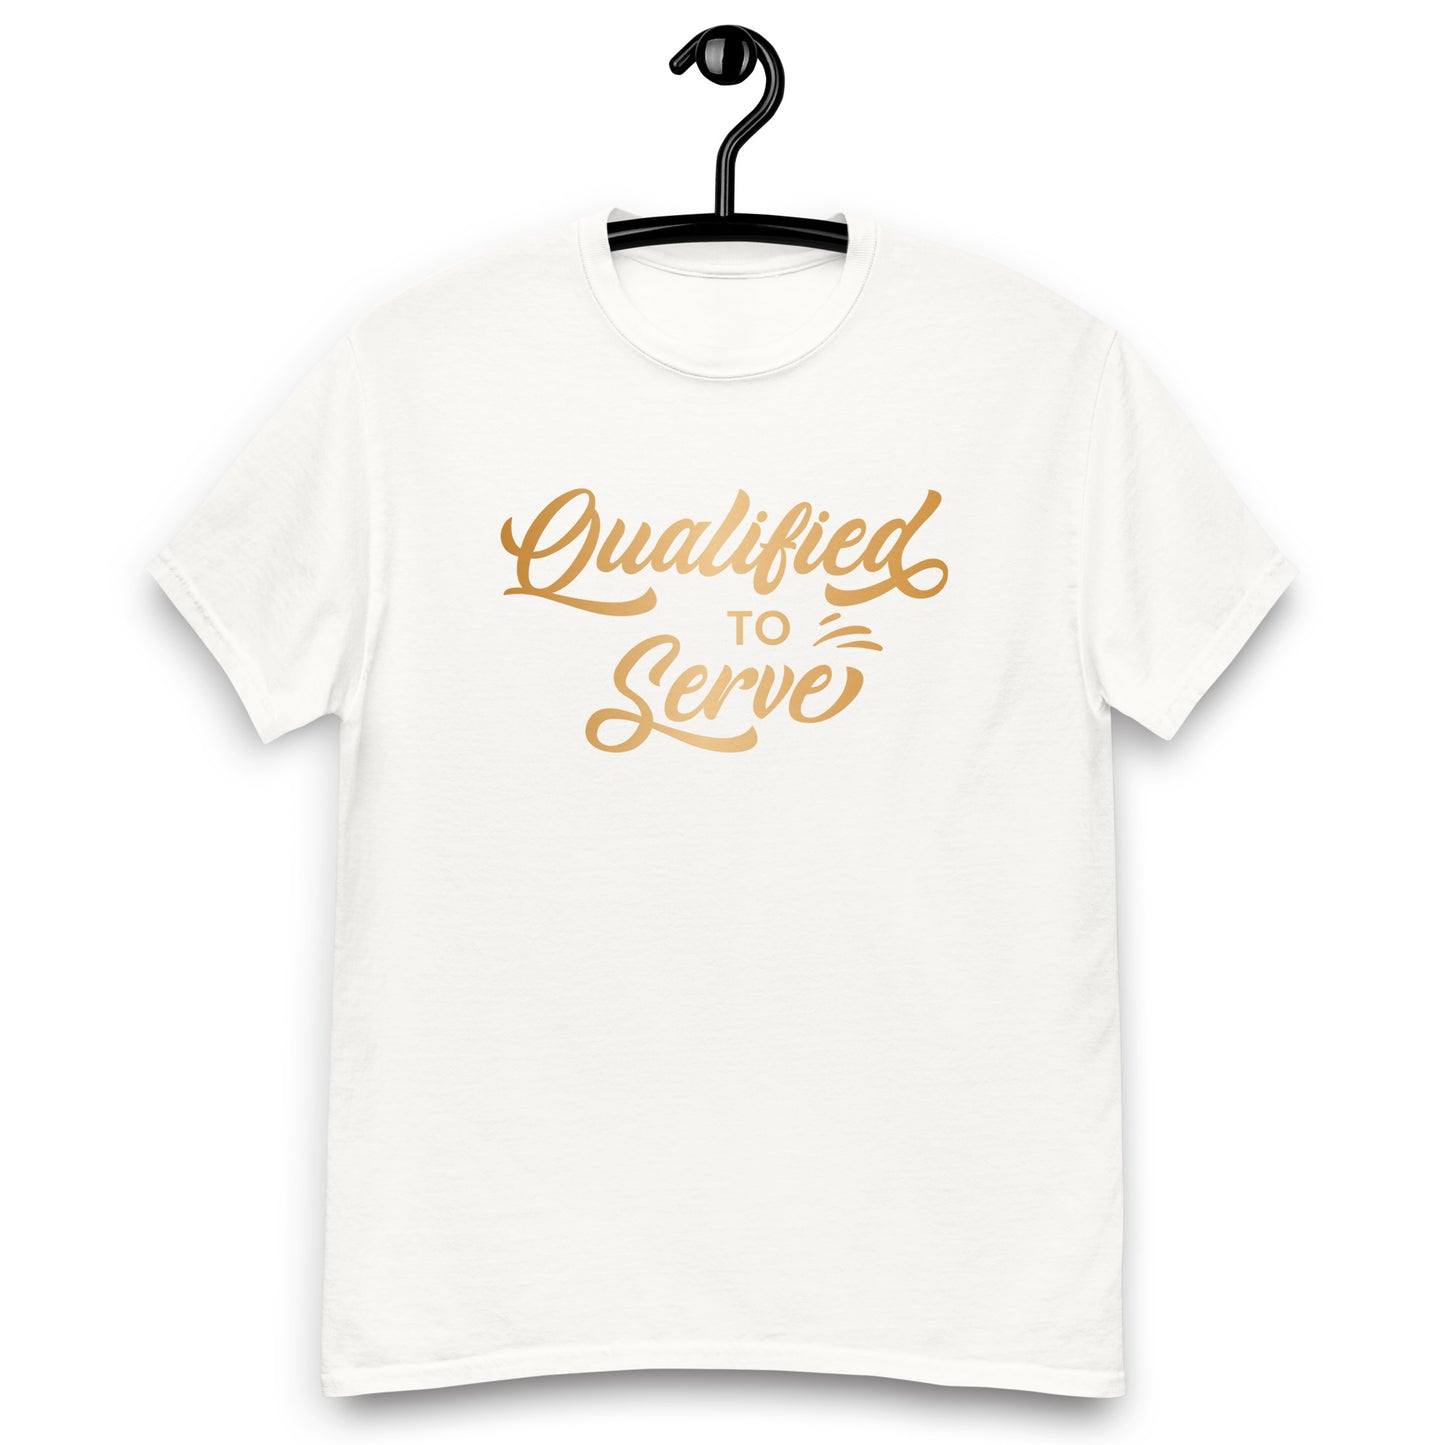 Qualified to Serve Adult Tee